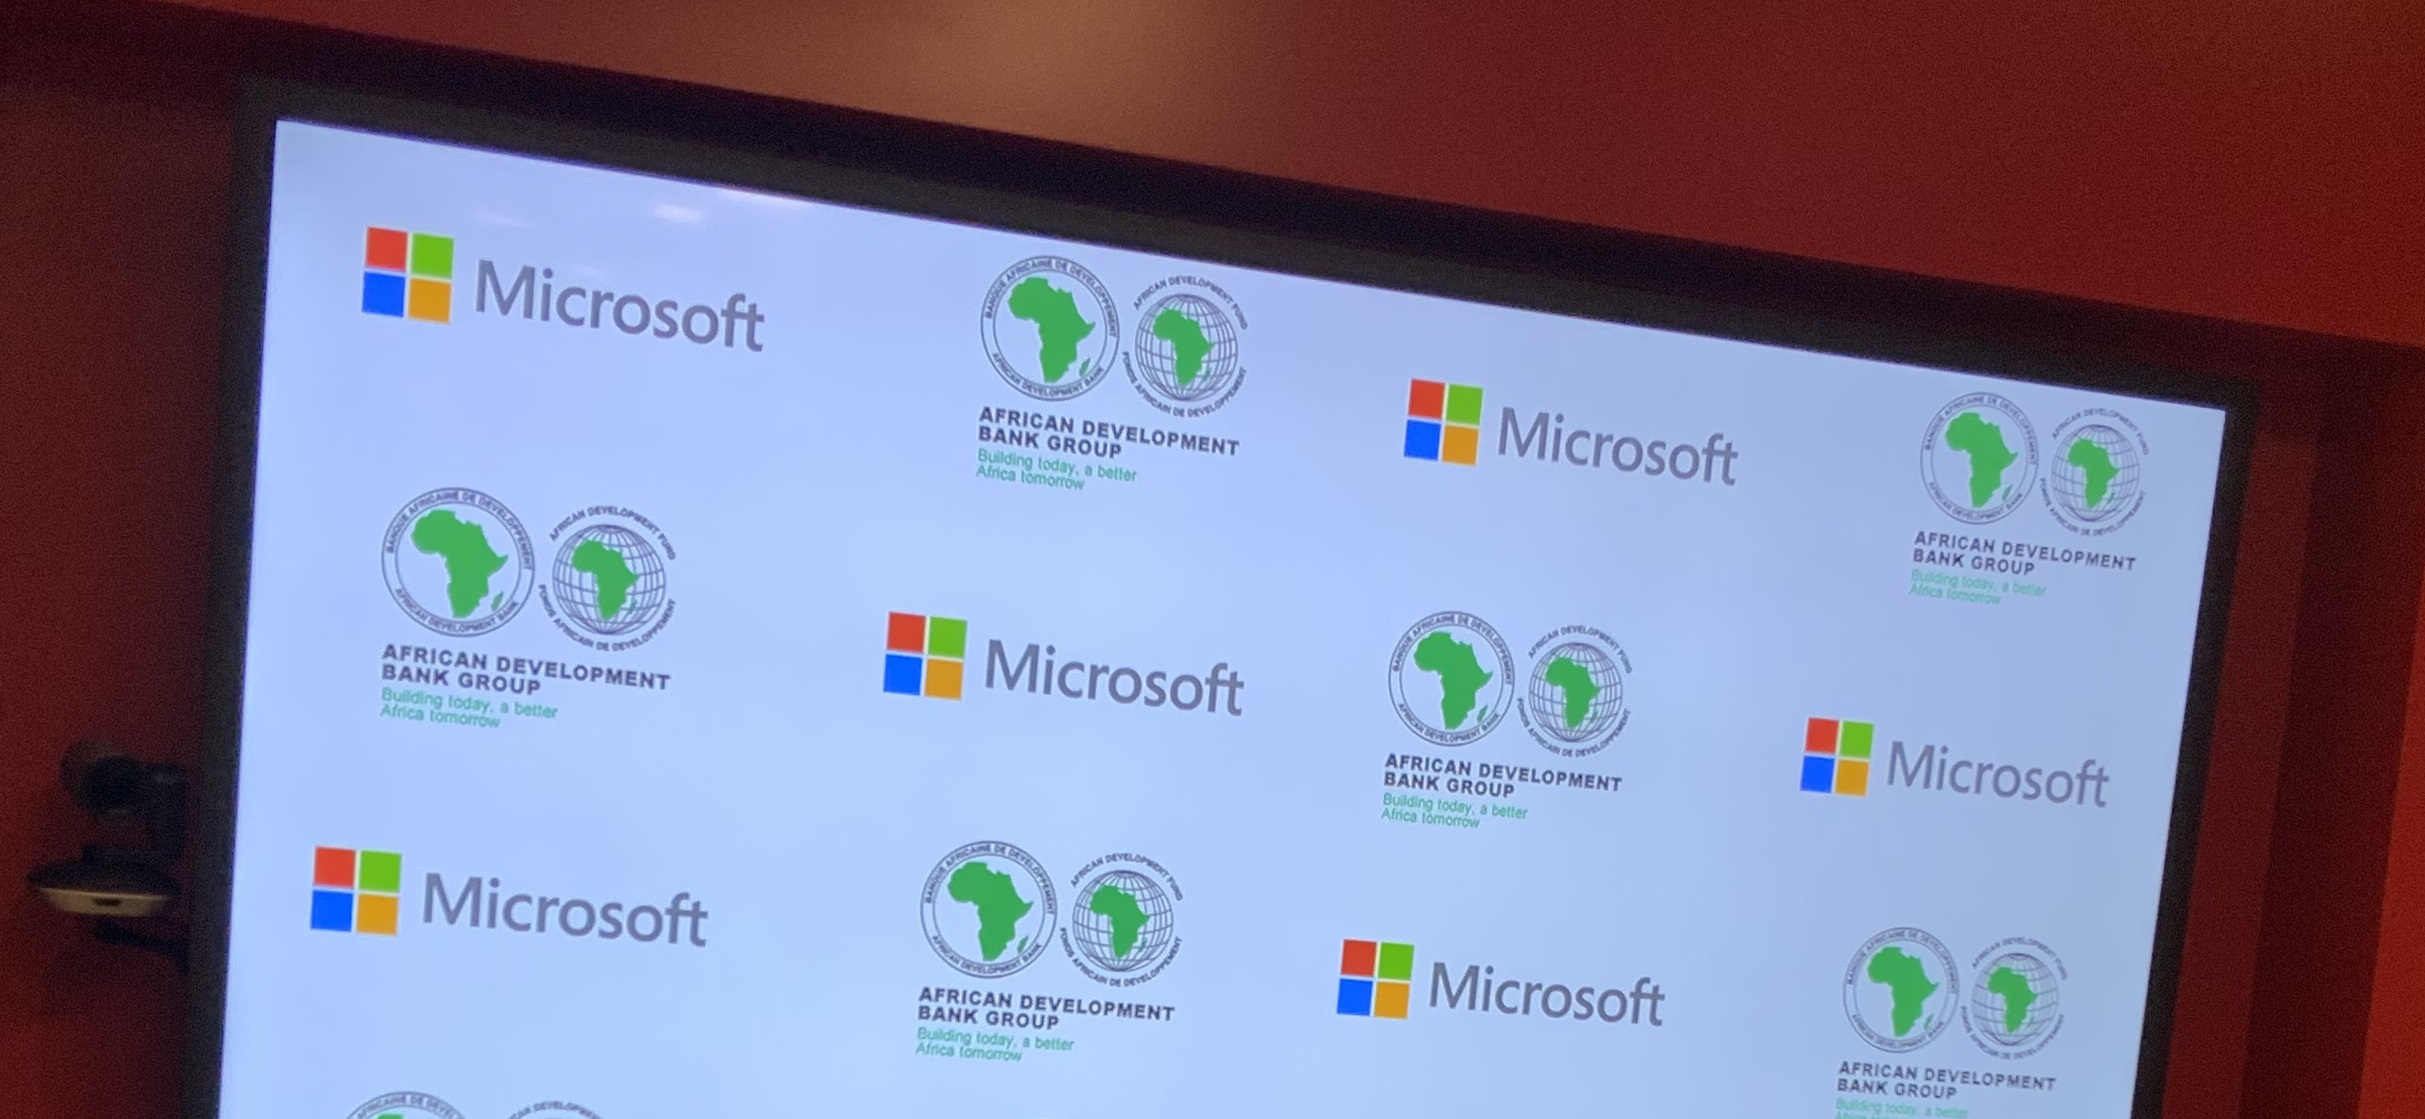 Microsoft and Africa Development Bank logos on a screen